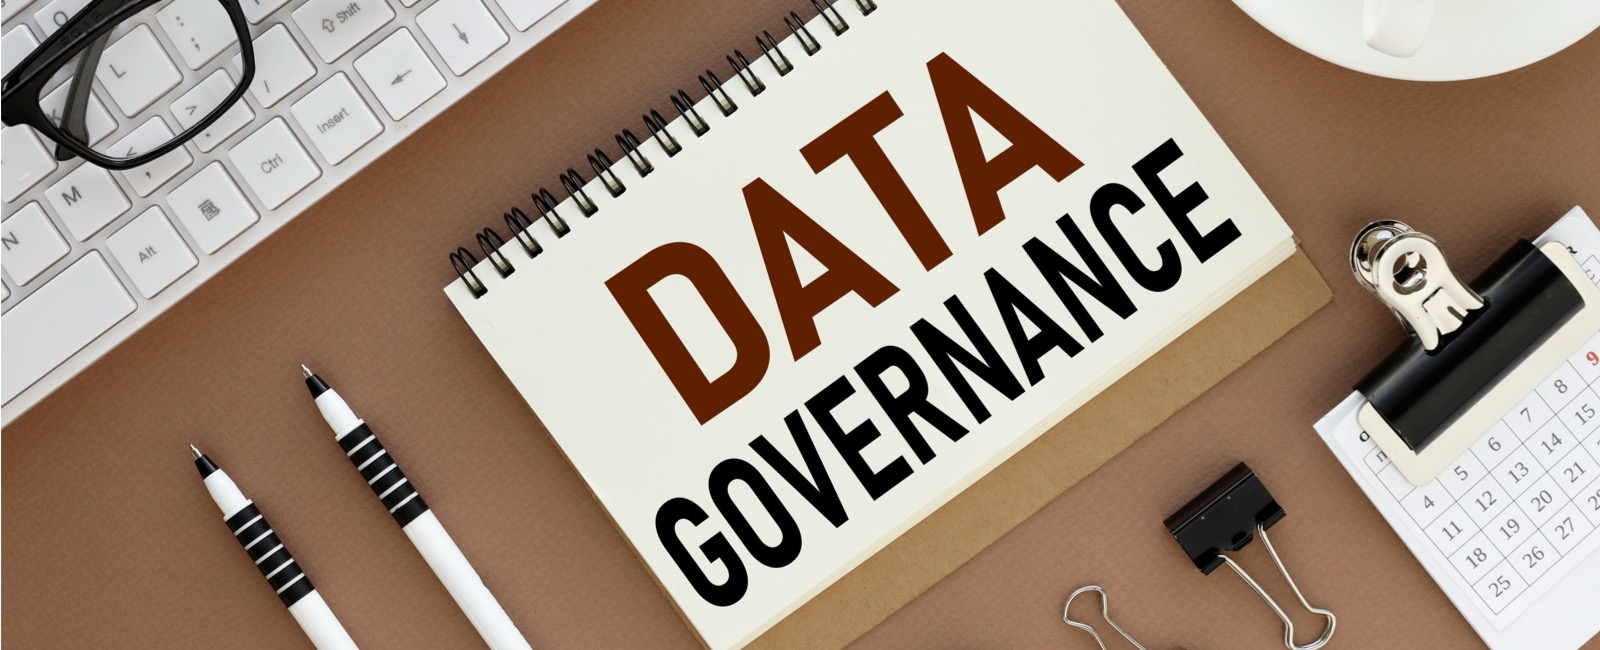 Getting Started with Data Governance